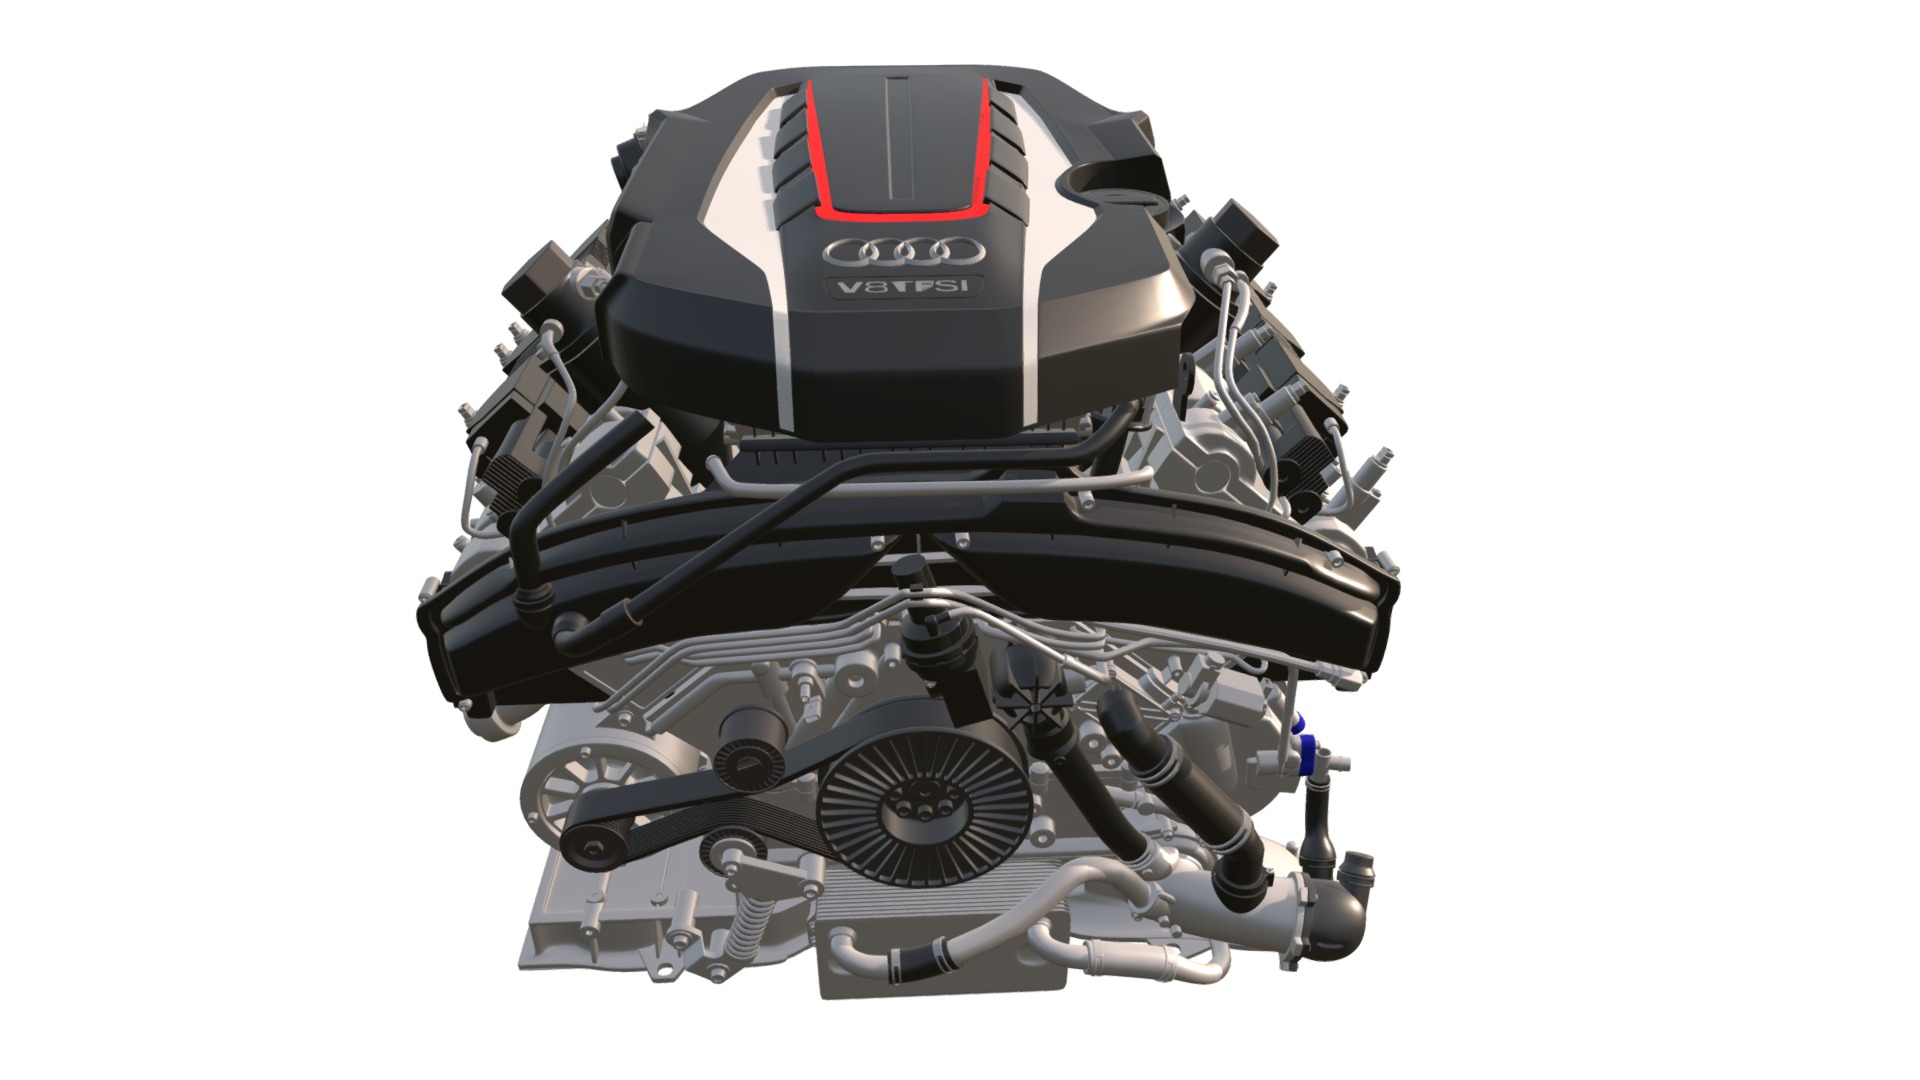 3D model Audi S8 TFSI V8 Engine - This is a 3D model of the Audi S8 TFSI V8 Engine. The 3D model is about a black and red motor.